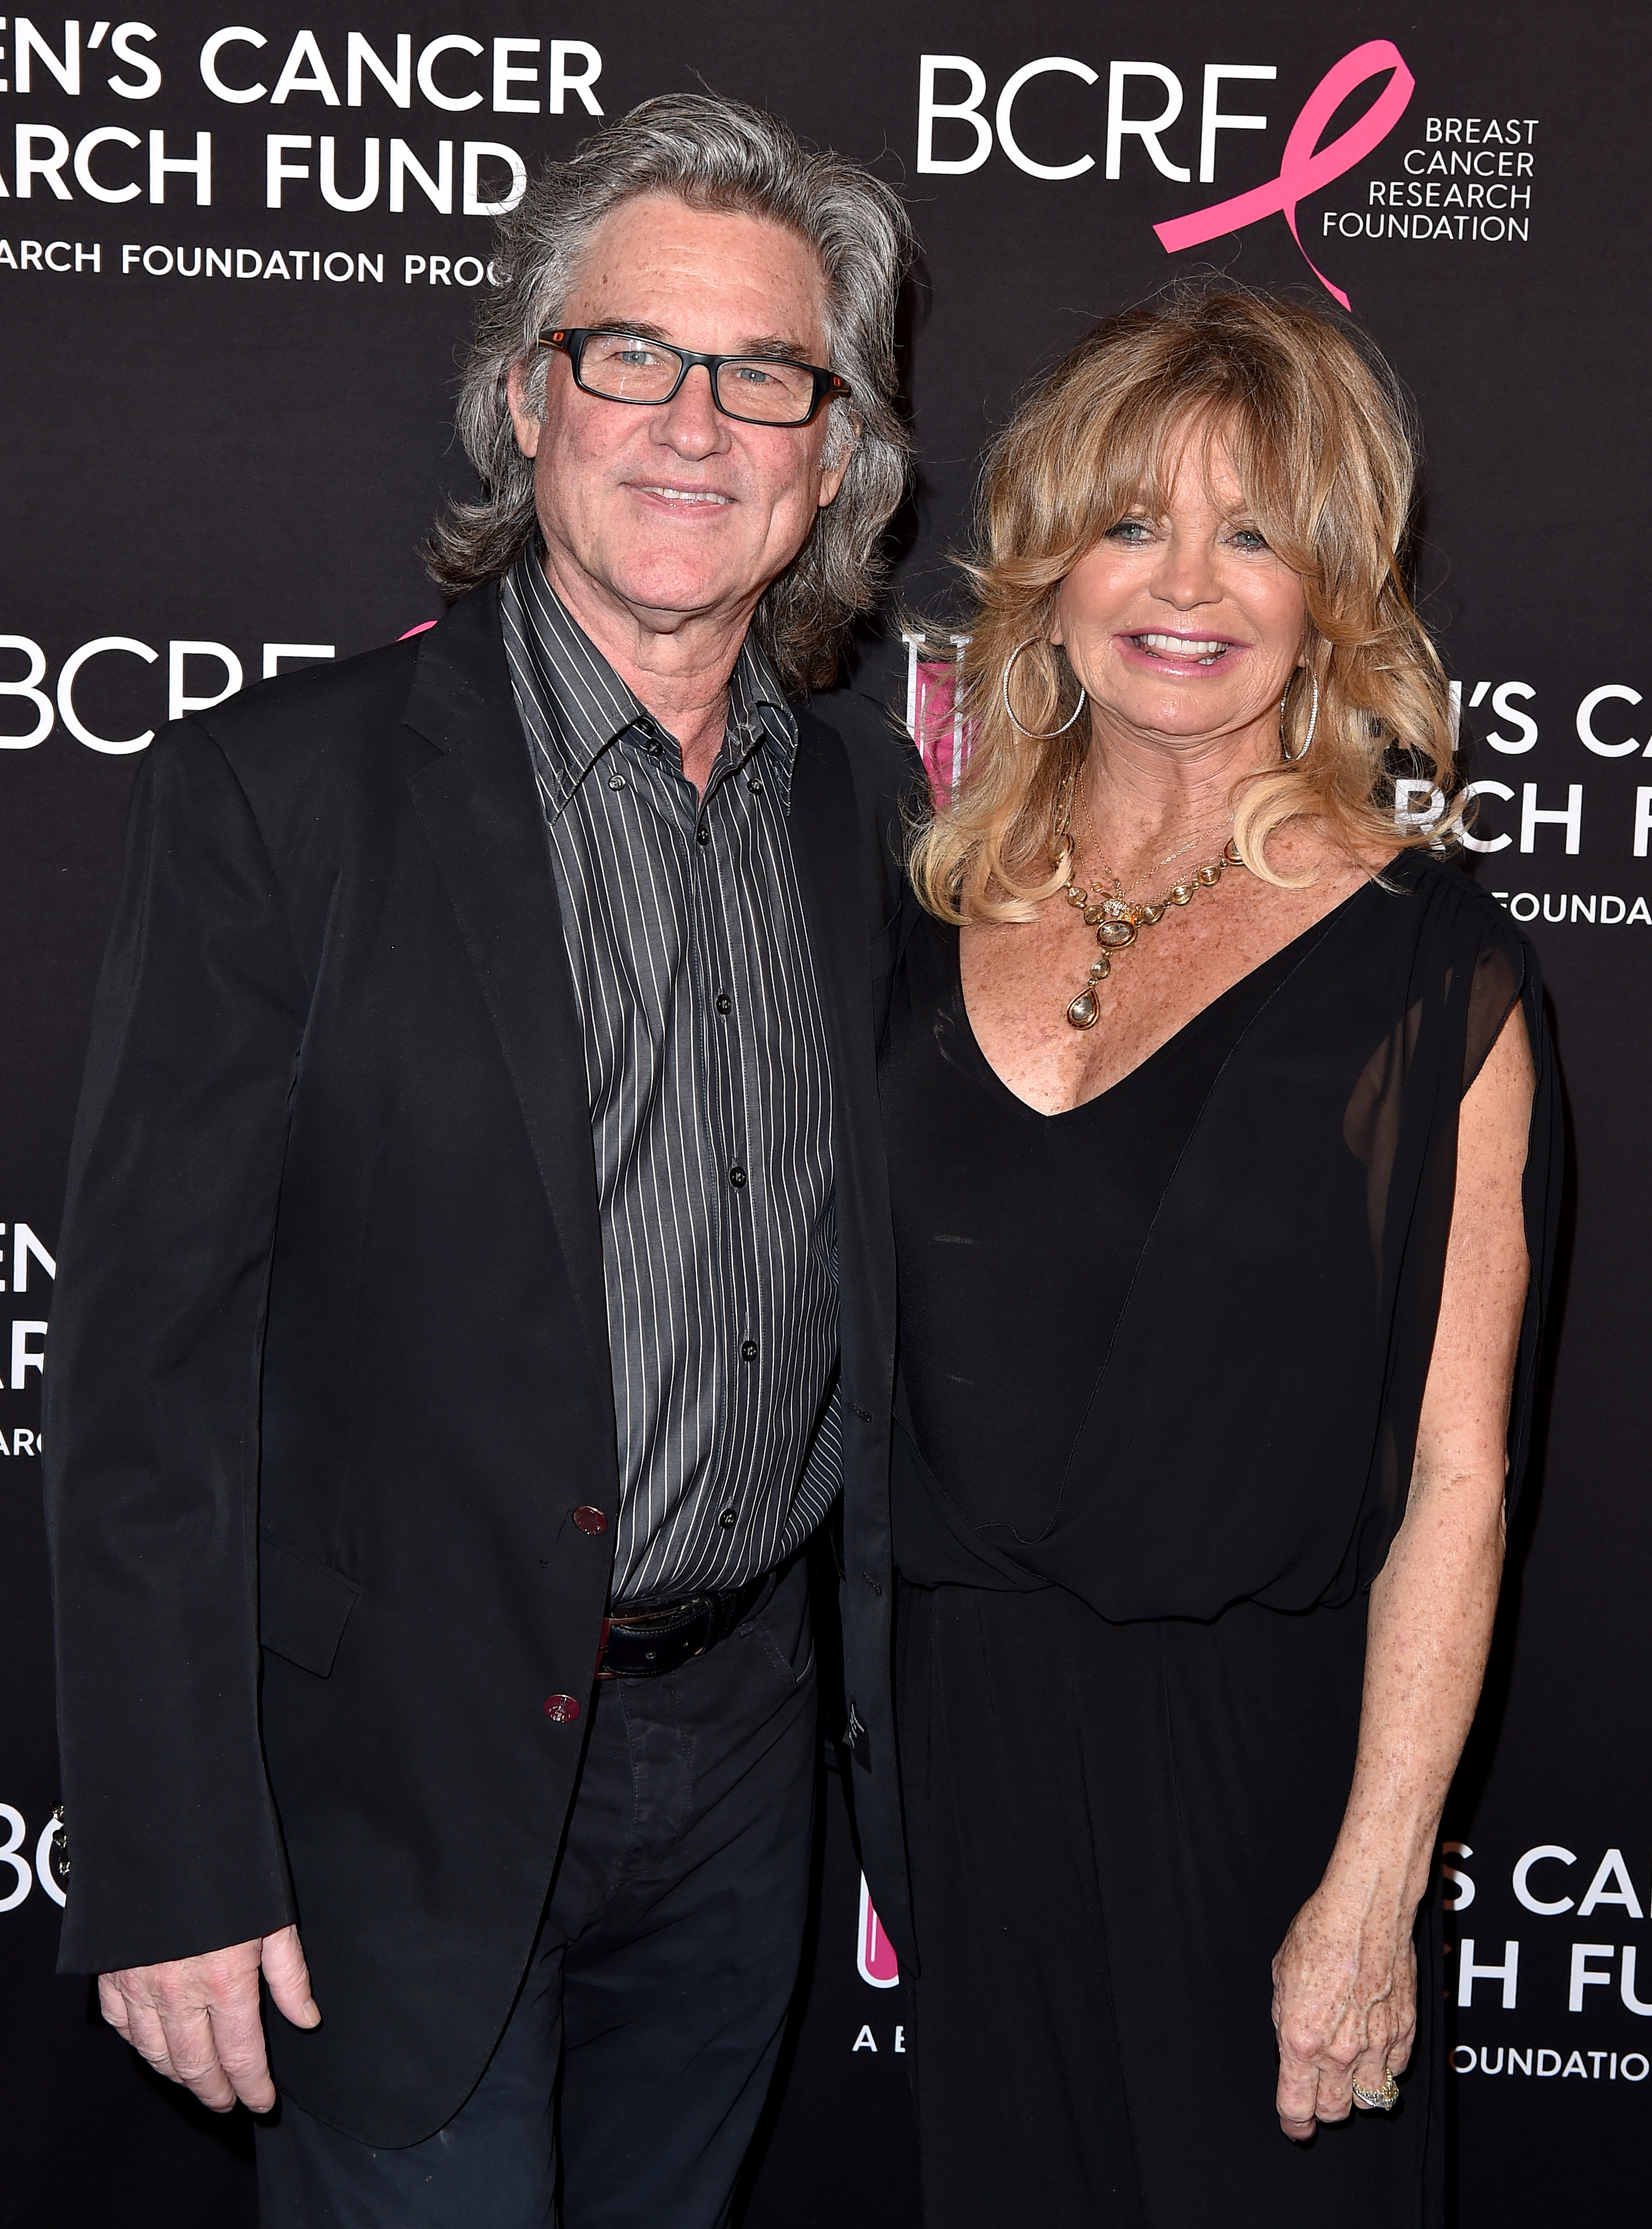 Kurt Russell and Goldie Hawn at the Women's Cancer Research Fund's An Unforgettable Evening Benefit Gala in Beverly Hills, California on February 28, 2019 | Source: Getty Images